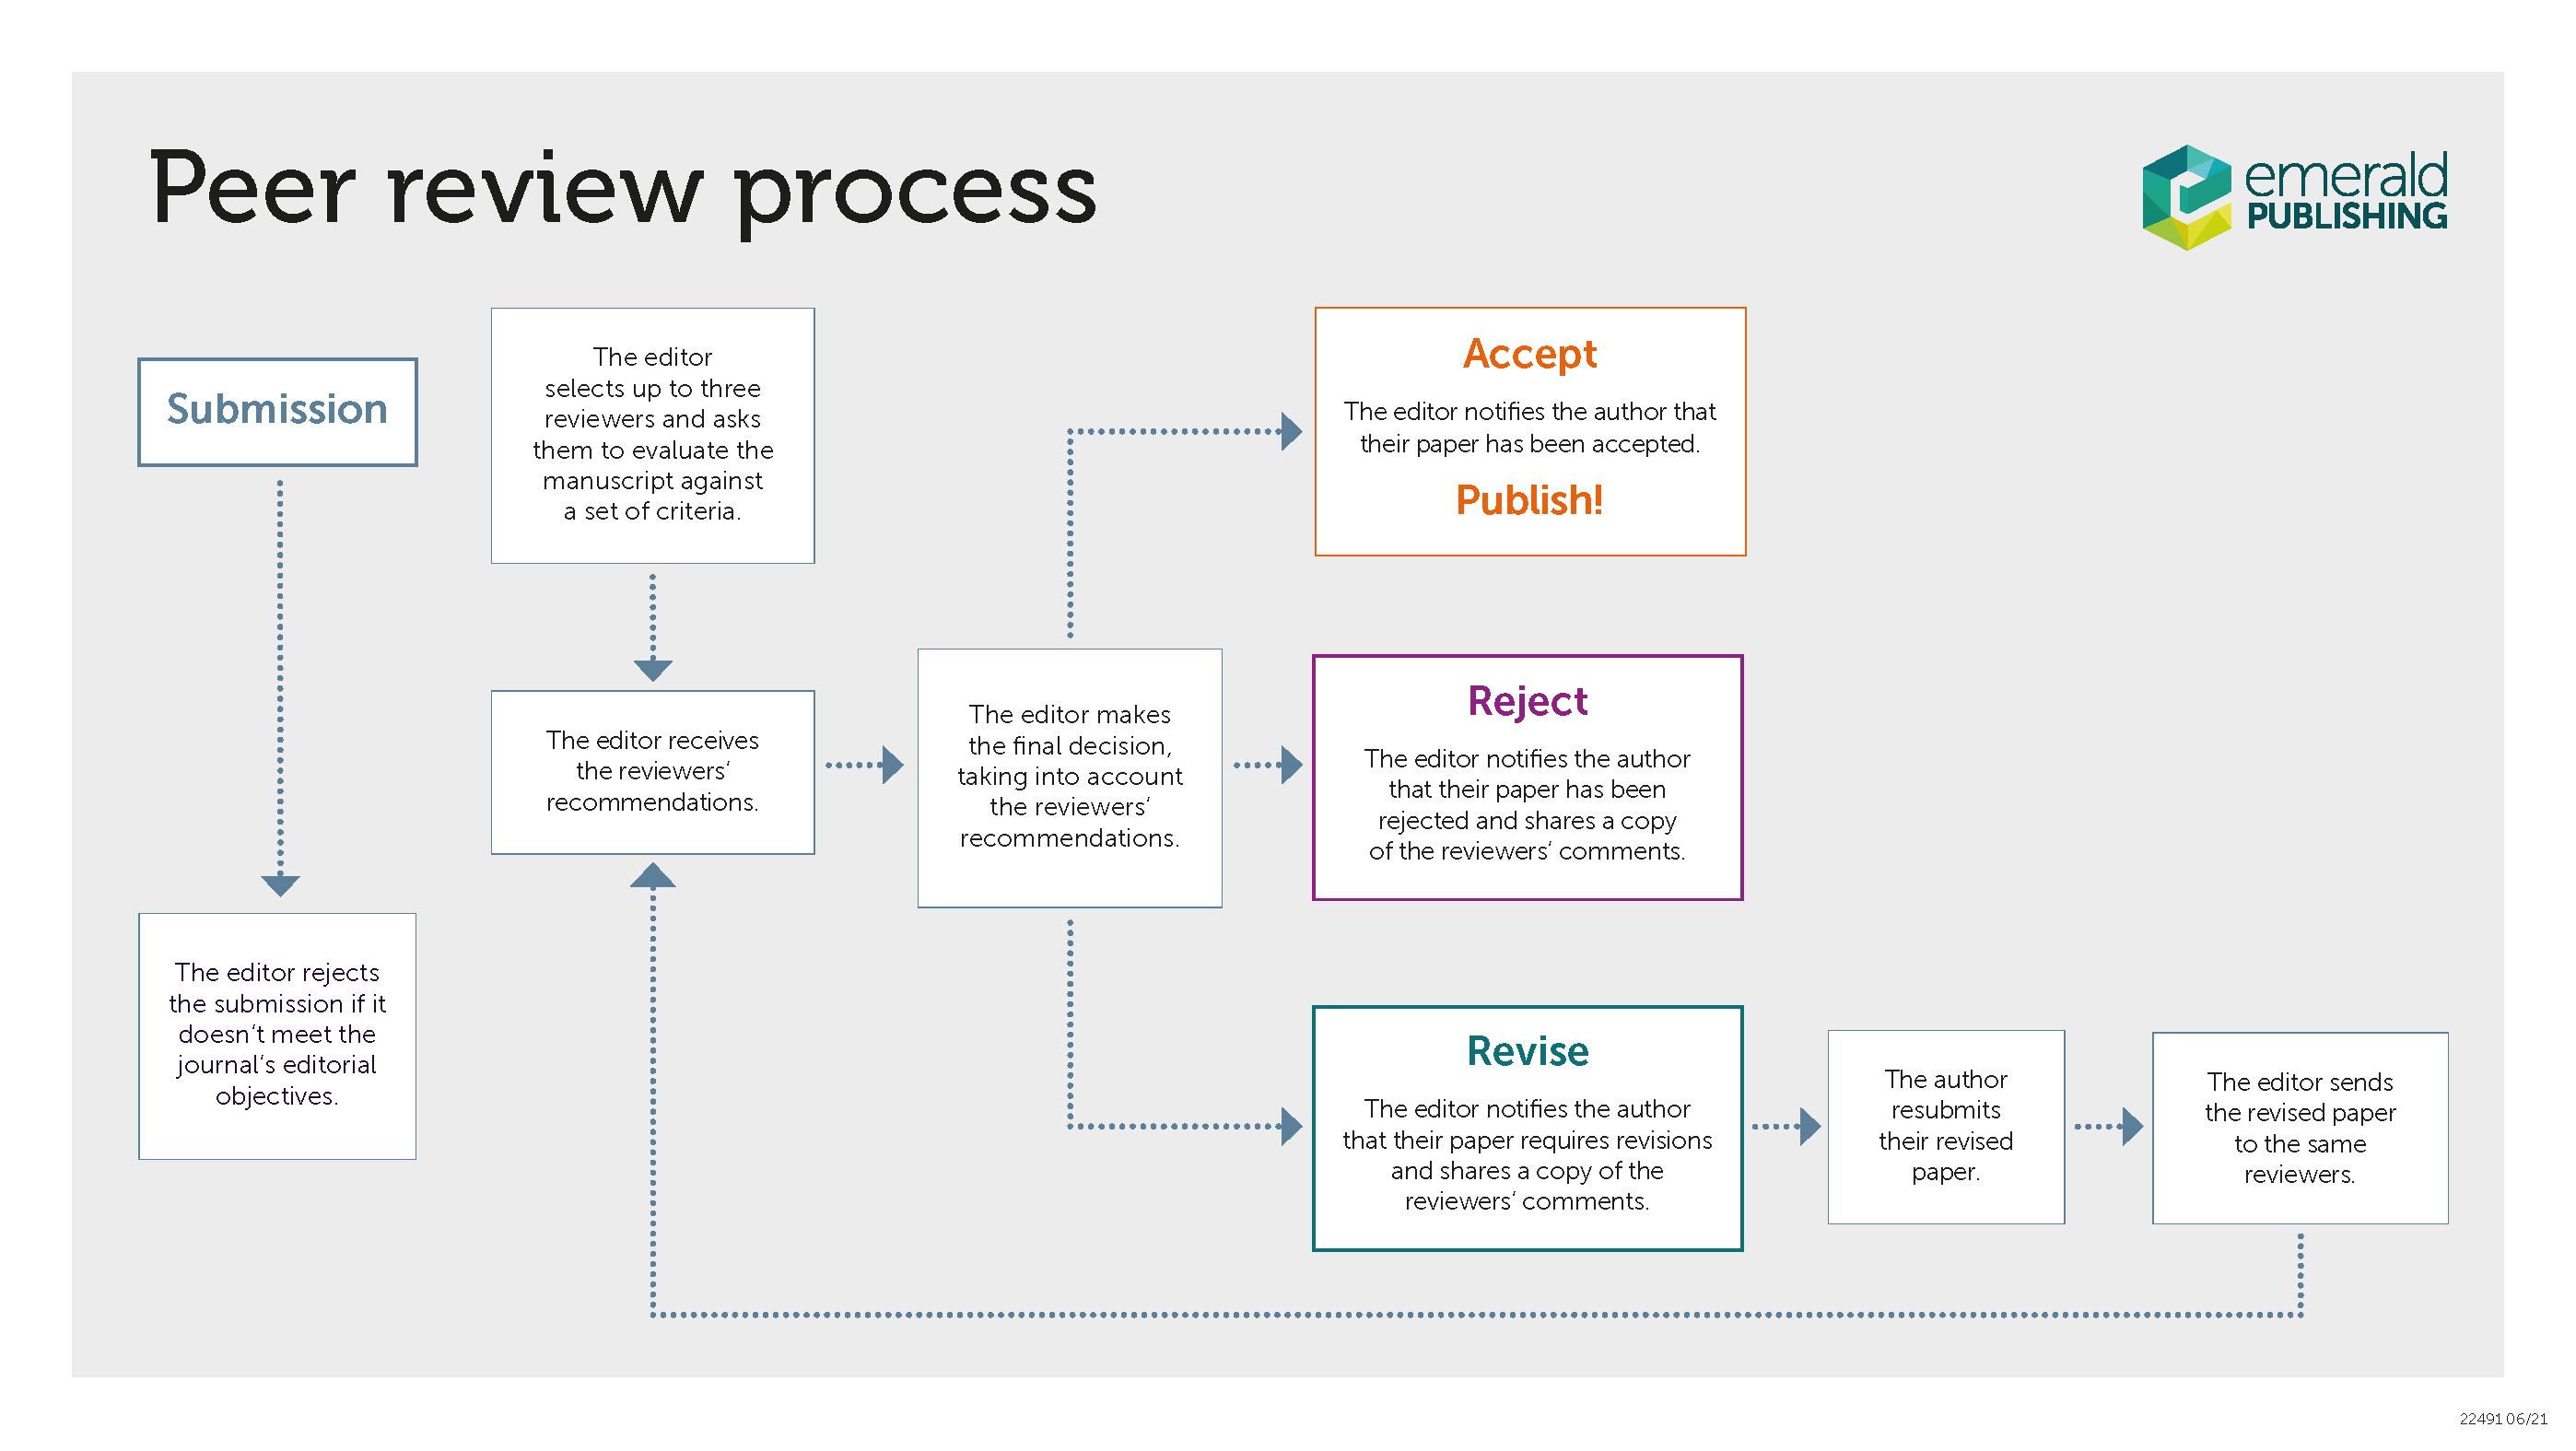 Peer review process chart